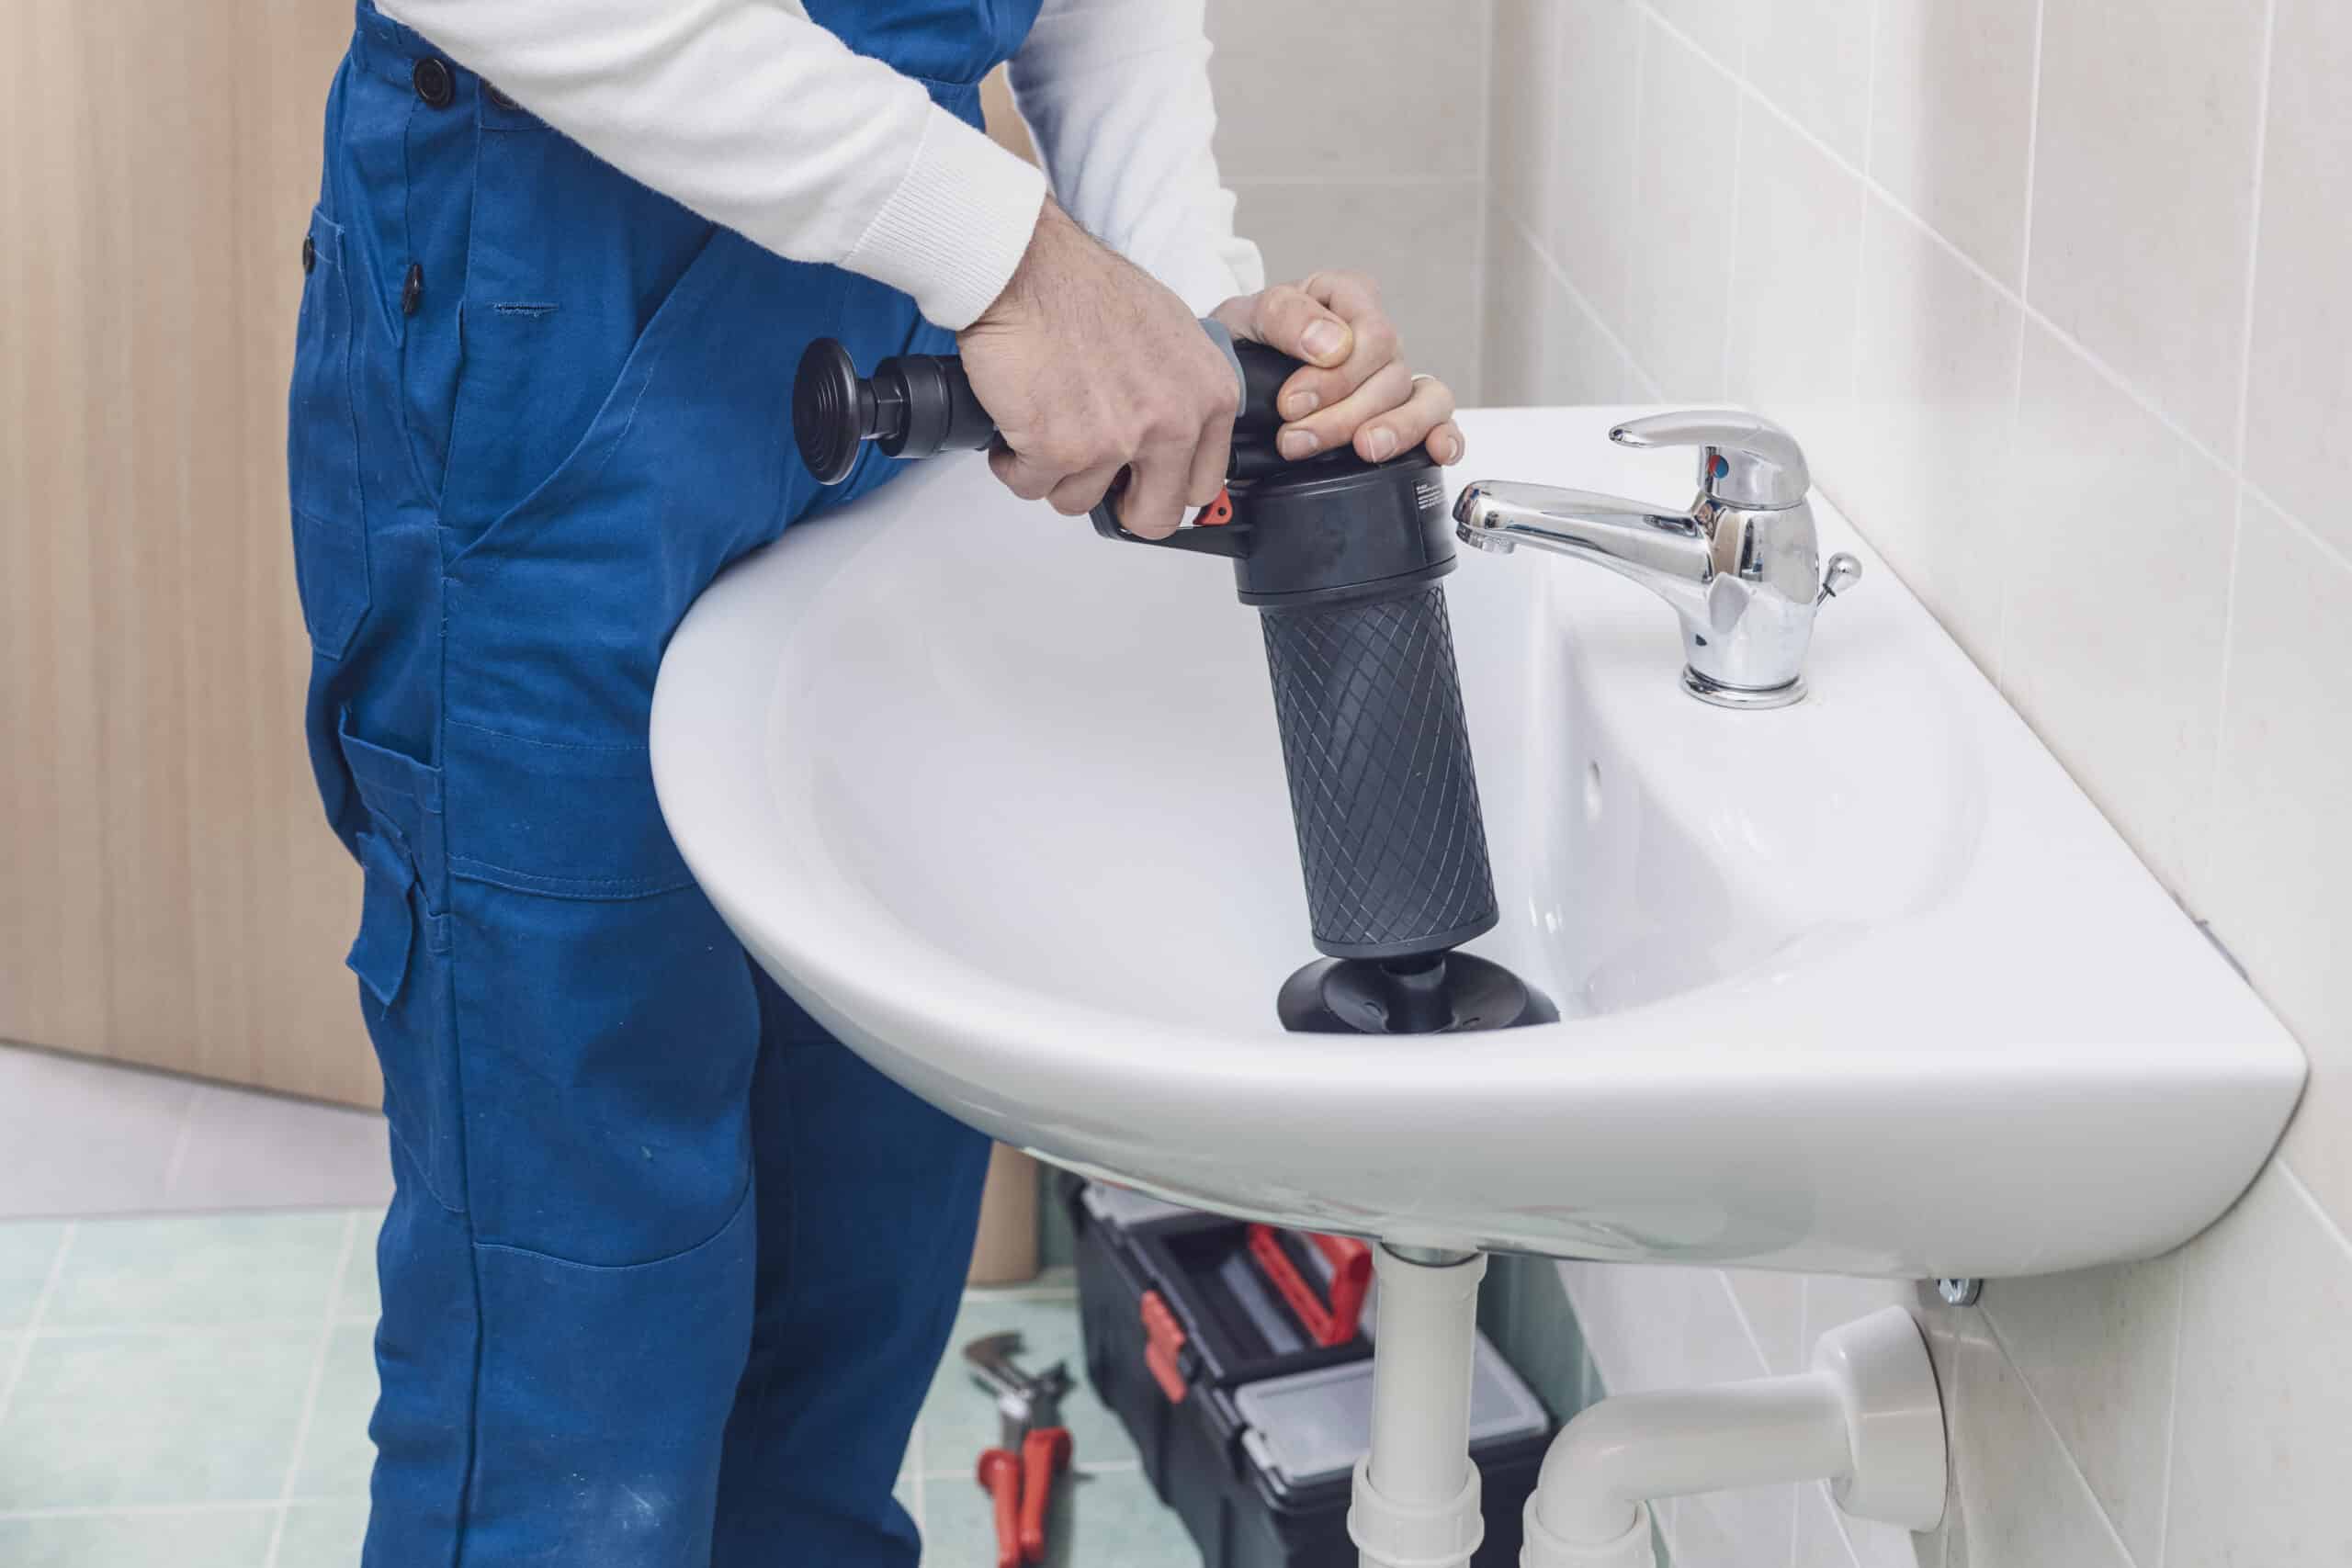 Professional plumber unclogging a sink using an air pump plunger